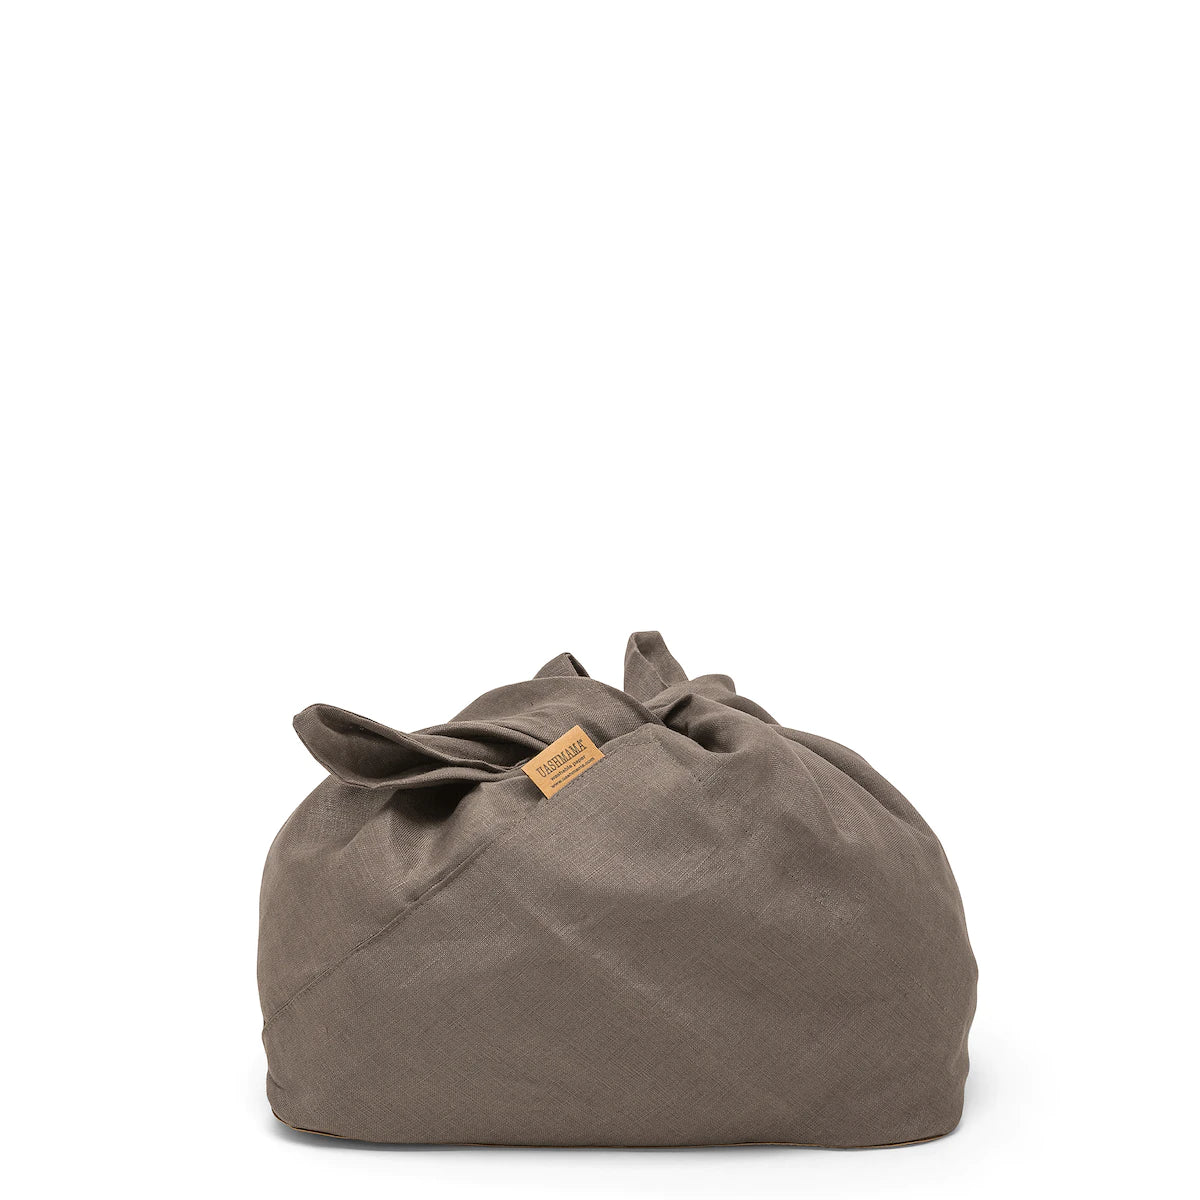 A large brown linen bread bag is shown with tied handles and a tan UASHMAMA logo tab at the front right side.